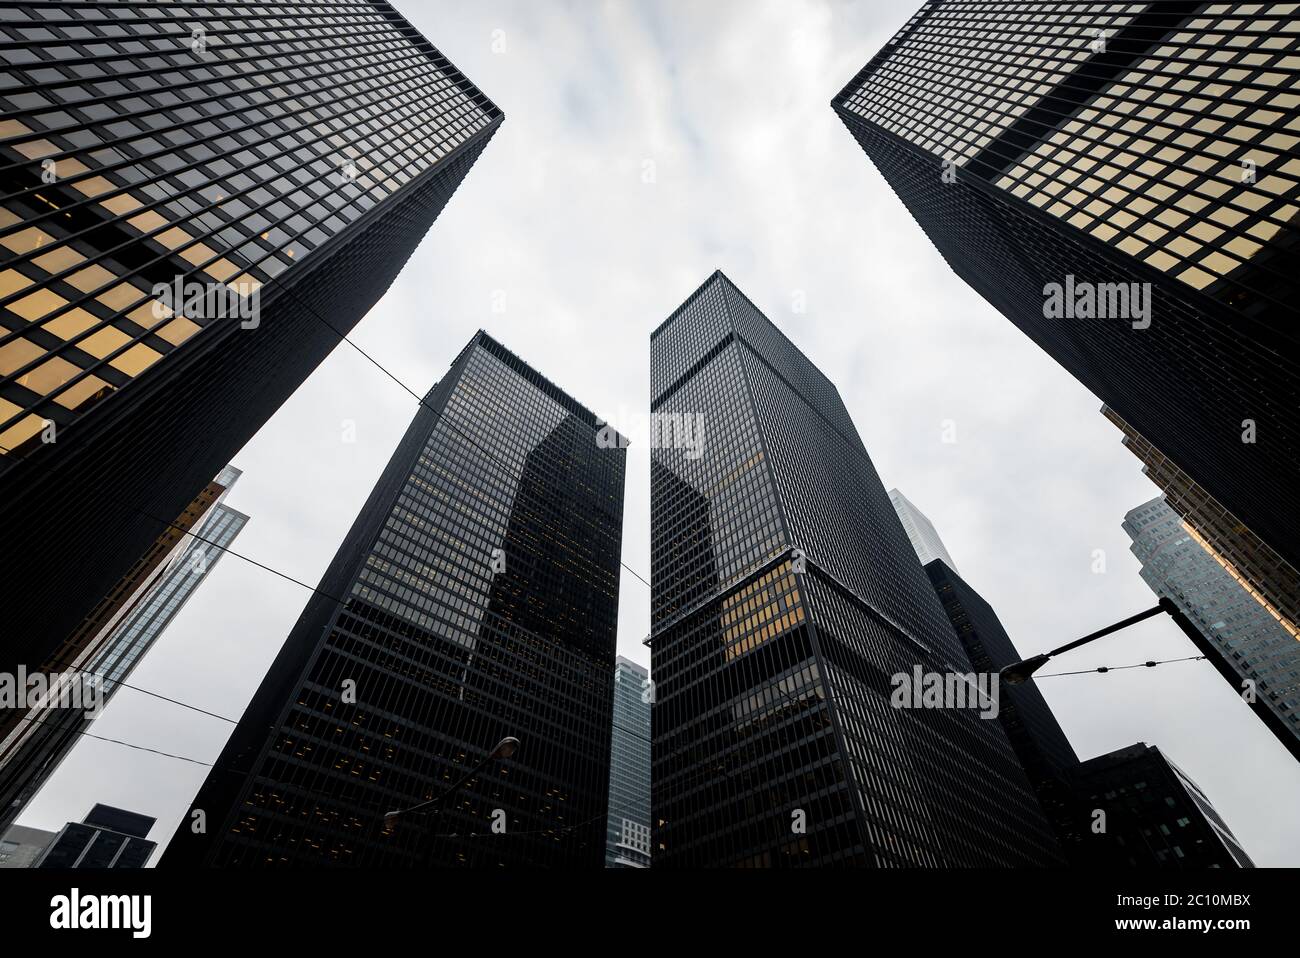 Low angle view of modern skyscrapers in downtown Toronto. Stock Photo